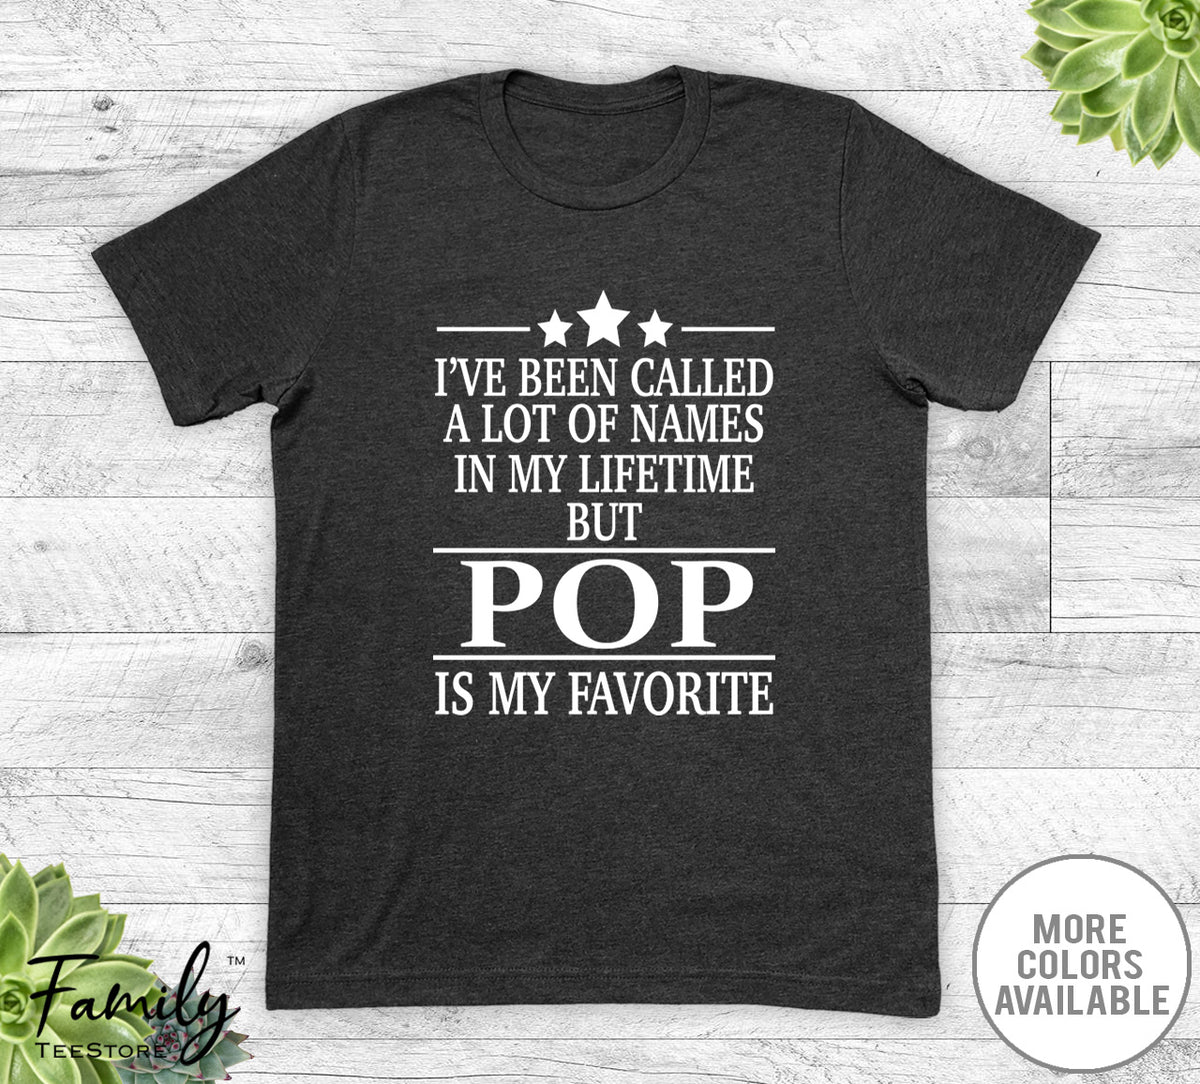 I've Been Called A Lot Of Names In My Lifetime But Pop - Unisex T-shirt - Pop Shirt - Pop Gift